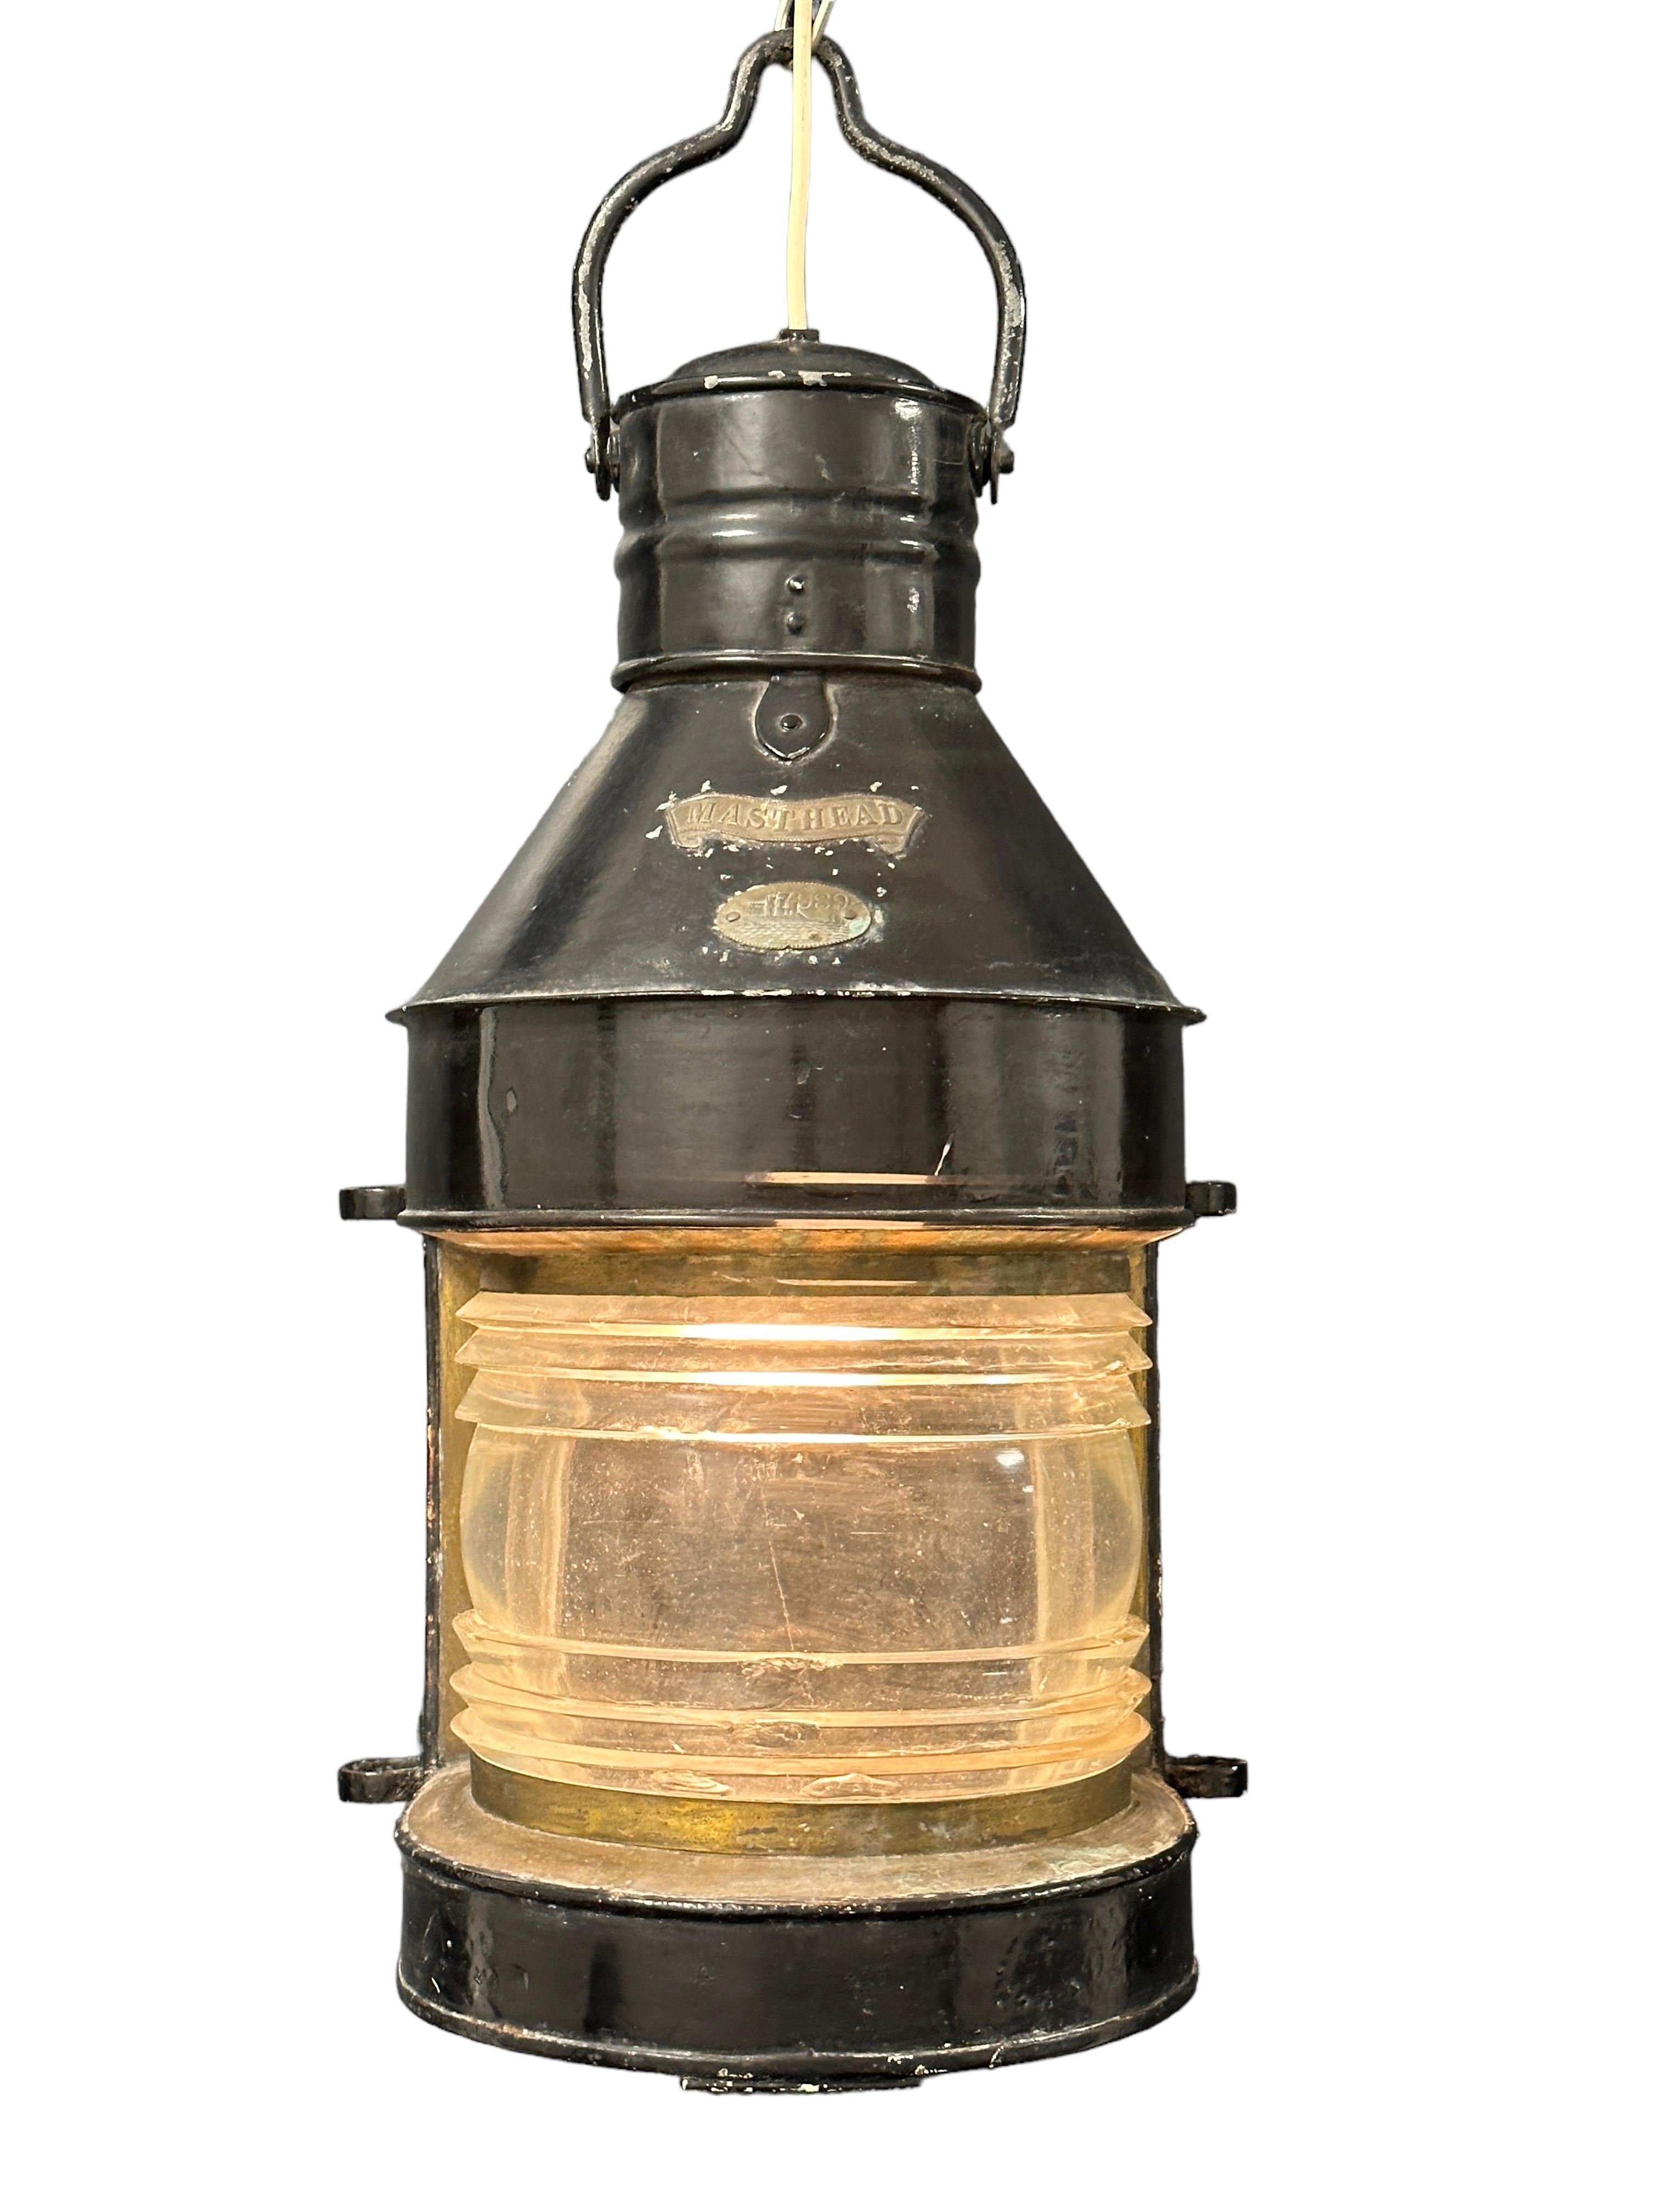 This is a large vintage solid metal and brass nautical 7989 Mast head Light, Maritime signal lantern/lamp with Fresnel lens. With carrying hoisting handle it is approx. 28.5